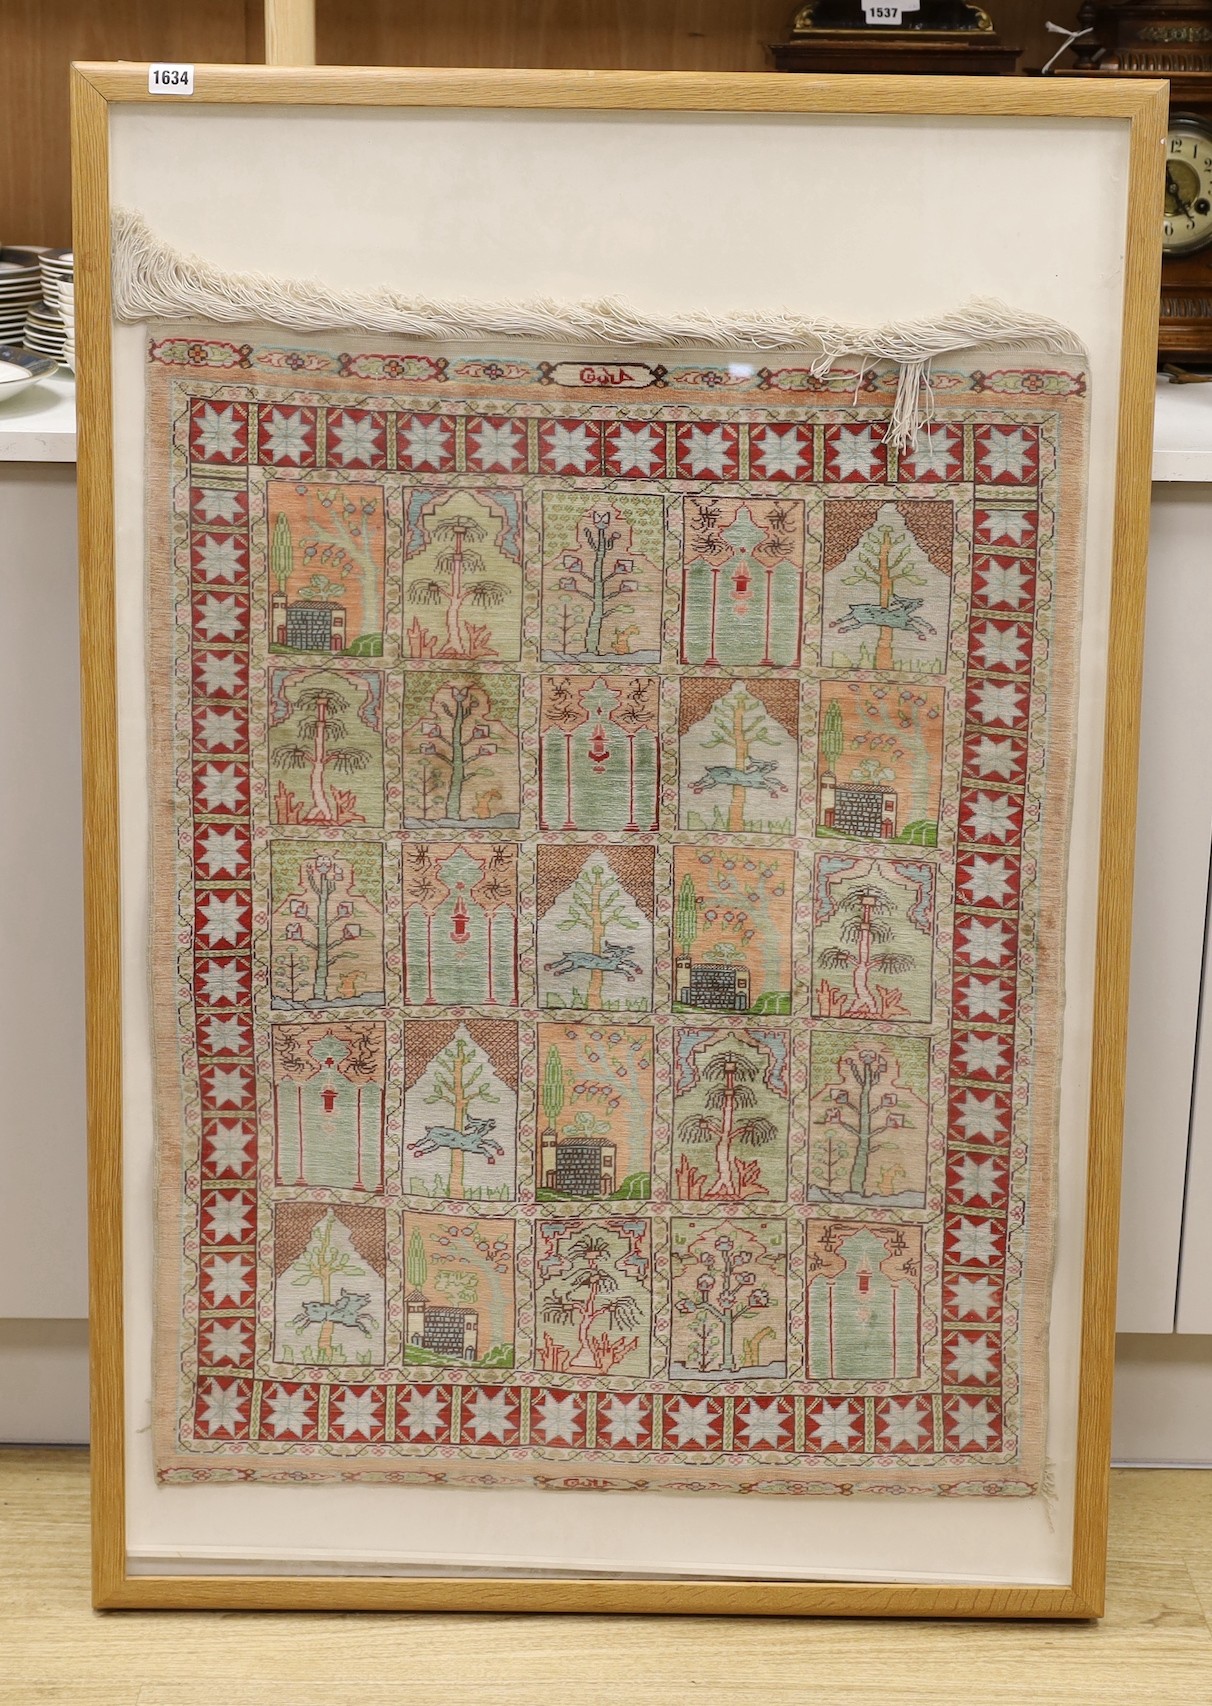 An Eastern framed silk rug depicting trees amimals and buildings, 86 cms high x 67cms wide